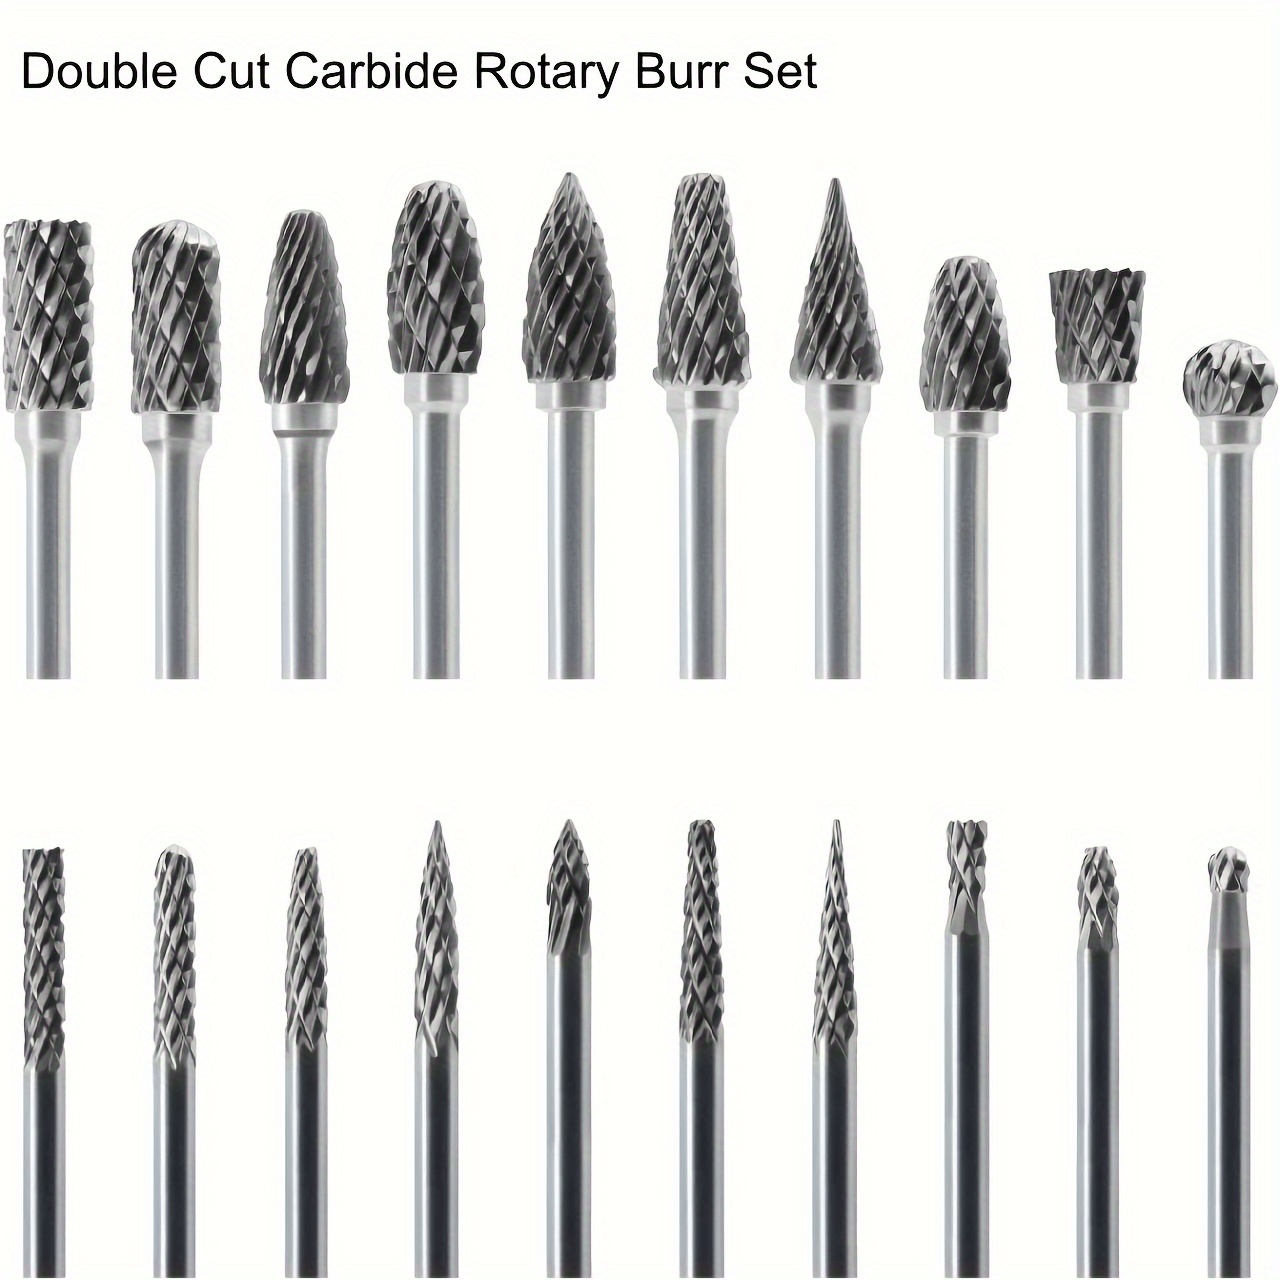 

Tungsten Carbide Burr Set, 20pcs Rotary Tool Accessory Kit, Die Grinder Rotary Tool Rasp Bits Accessories Attachments Metal Wood Stone Plastic Carving Cutting Cleaning Grinding Engraving